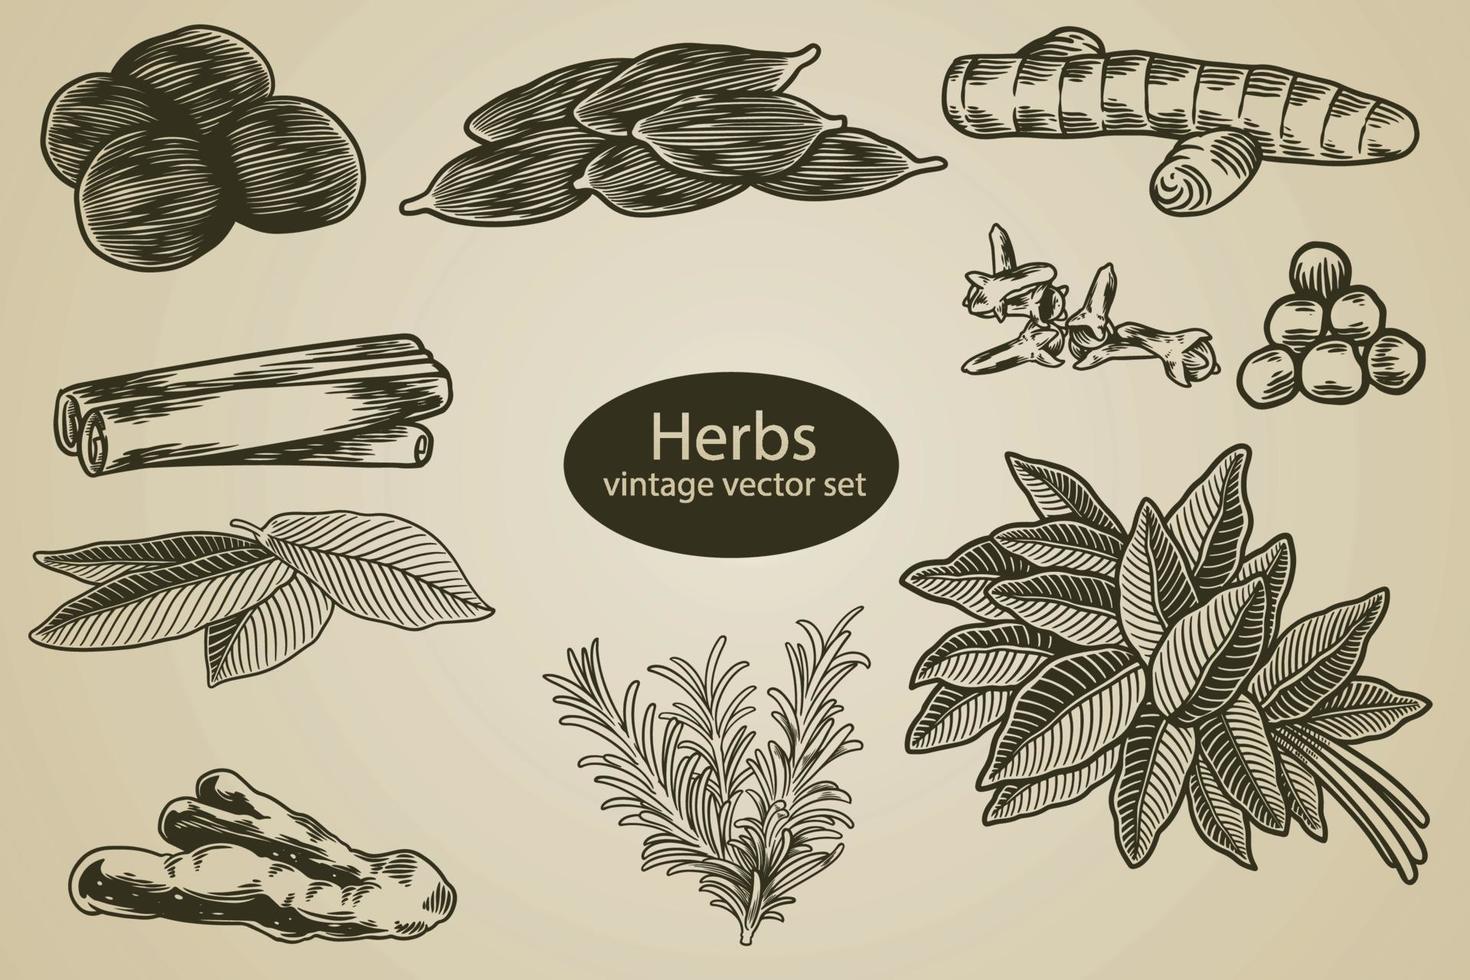 Collection of spices and herbs. Isolated set of cinnamon, turmeric, cloves, nutmeg etc. Hand drawn branches and leaves vintage engraving sketch. Vector food and ingredient illustration